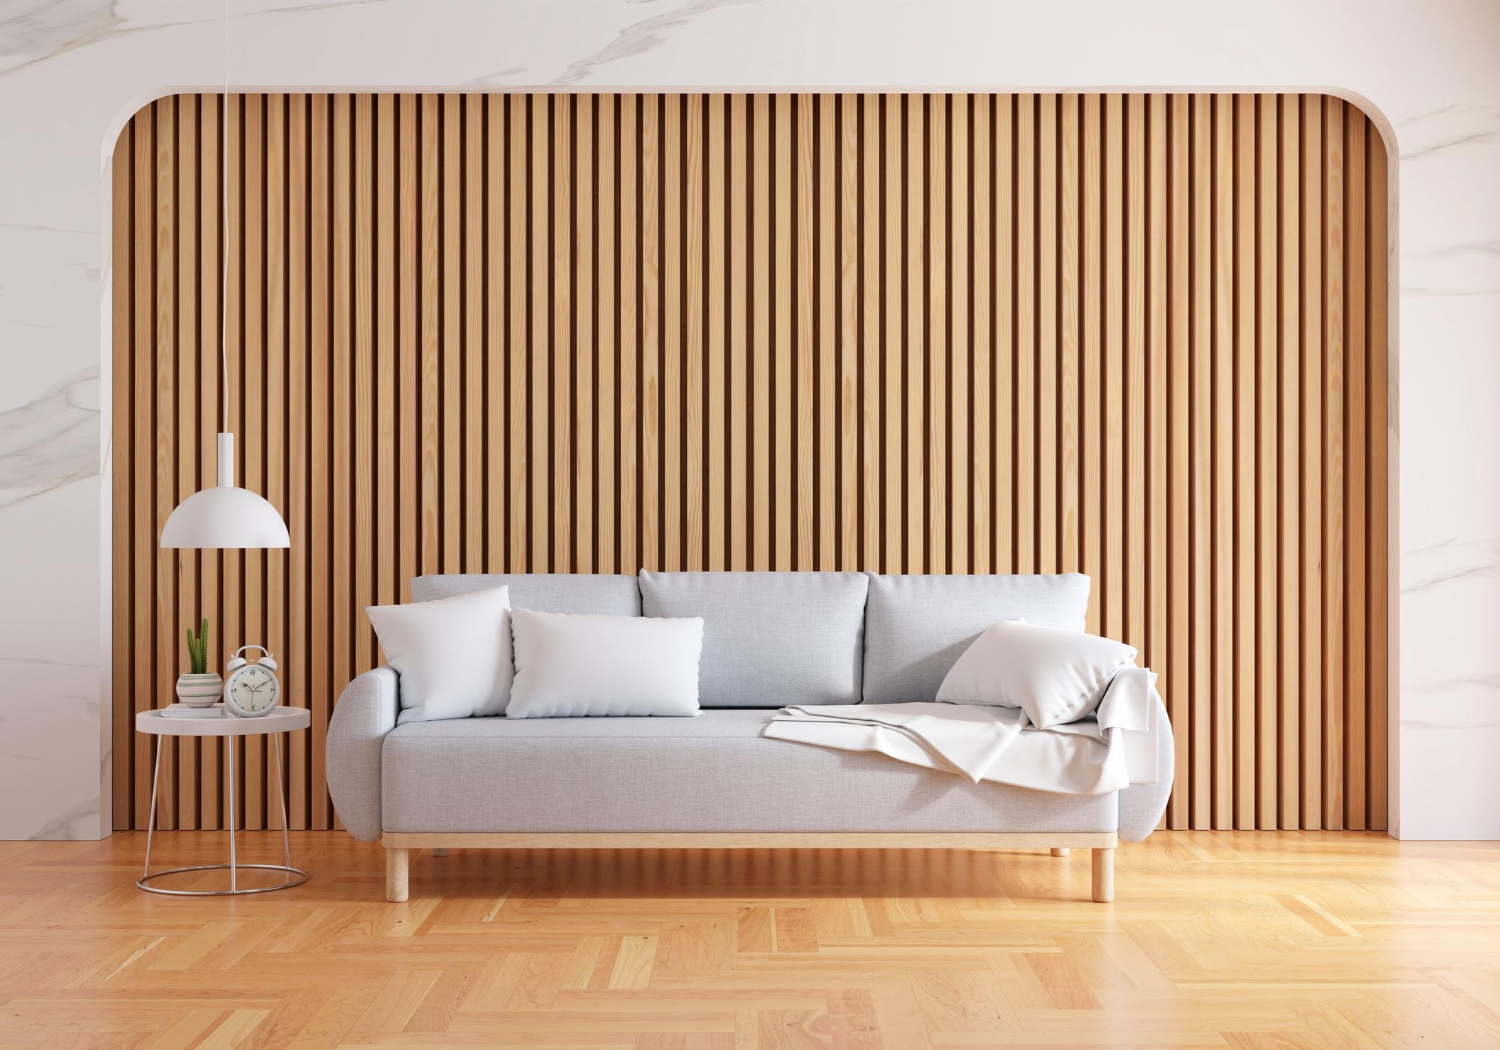 Acoustic Wall Panels: The Sound Solution for Serenity